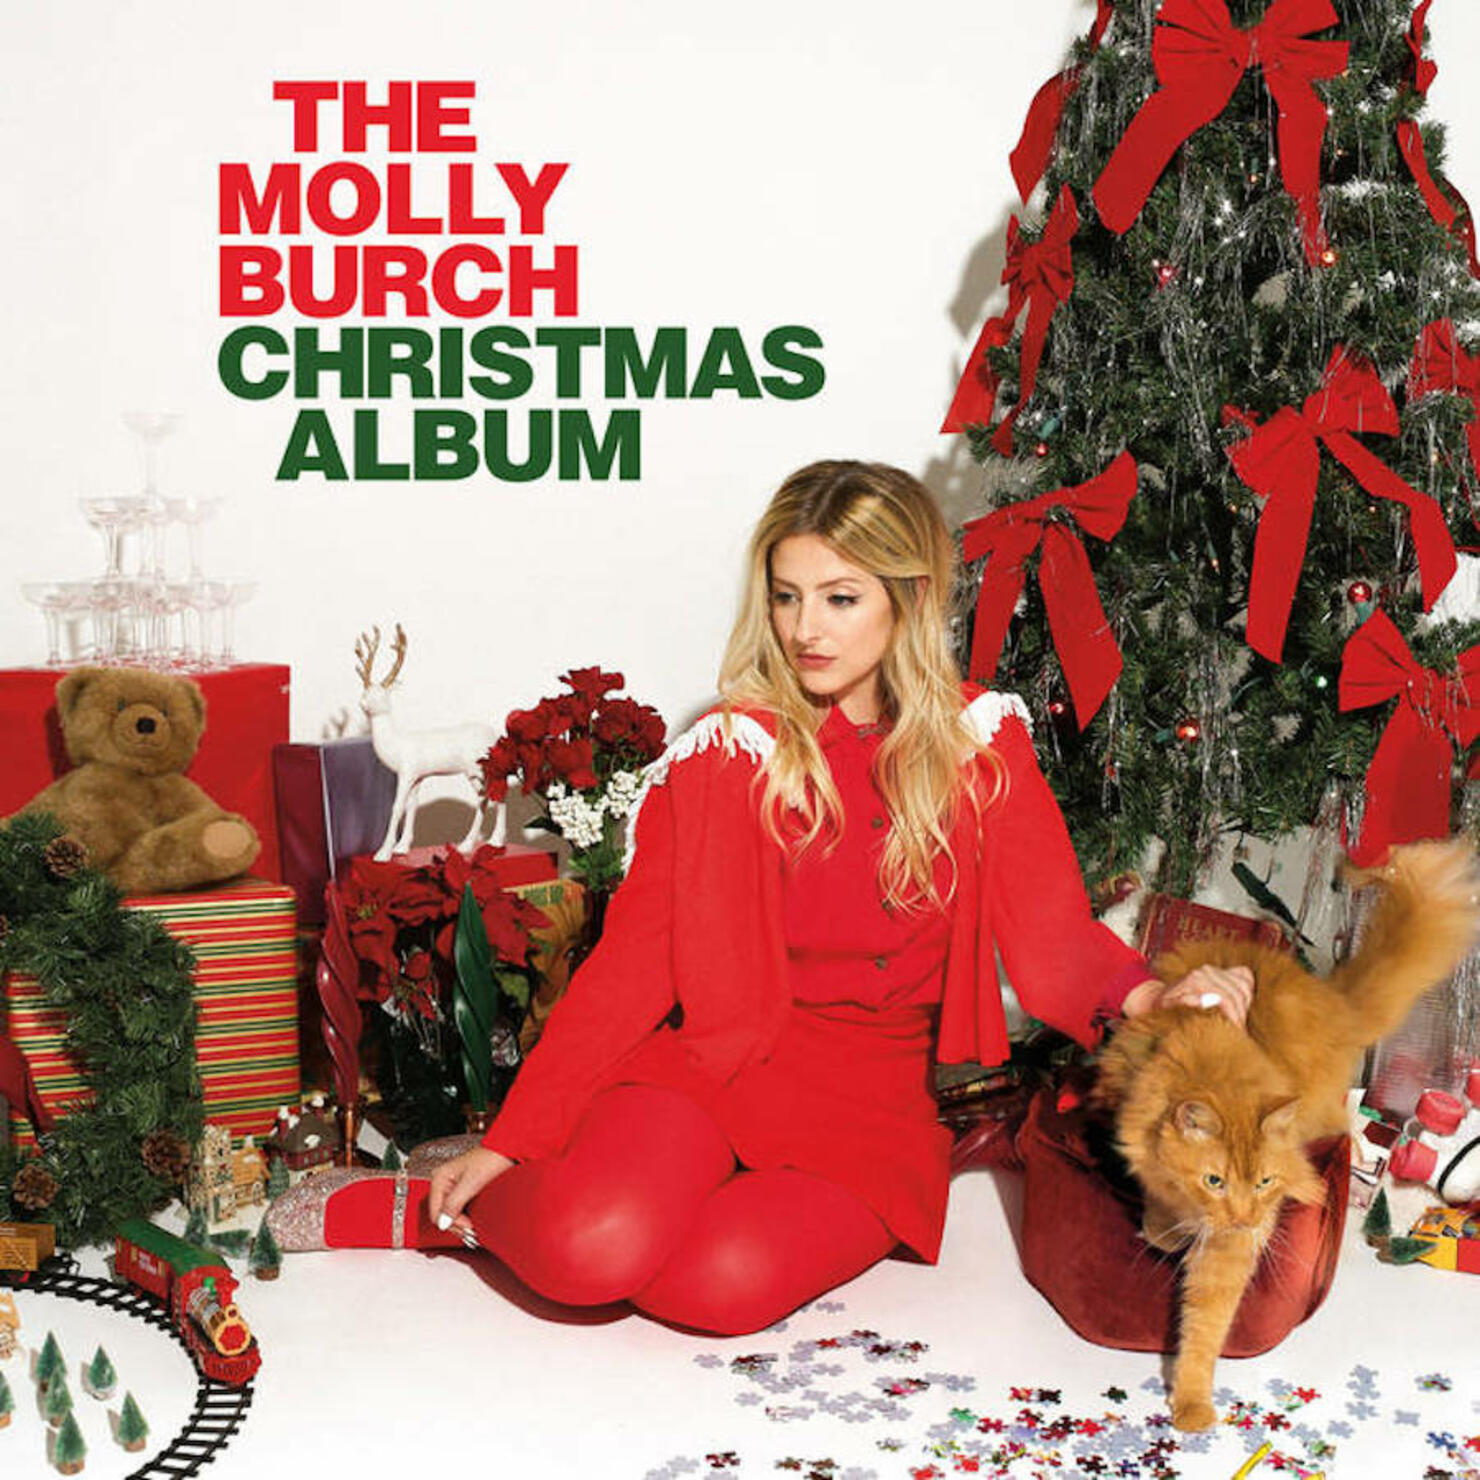 Holiday albums: What's your guilty pleasure?